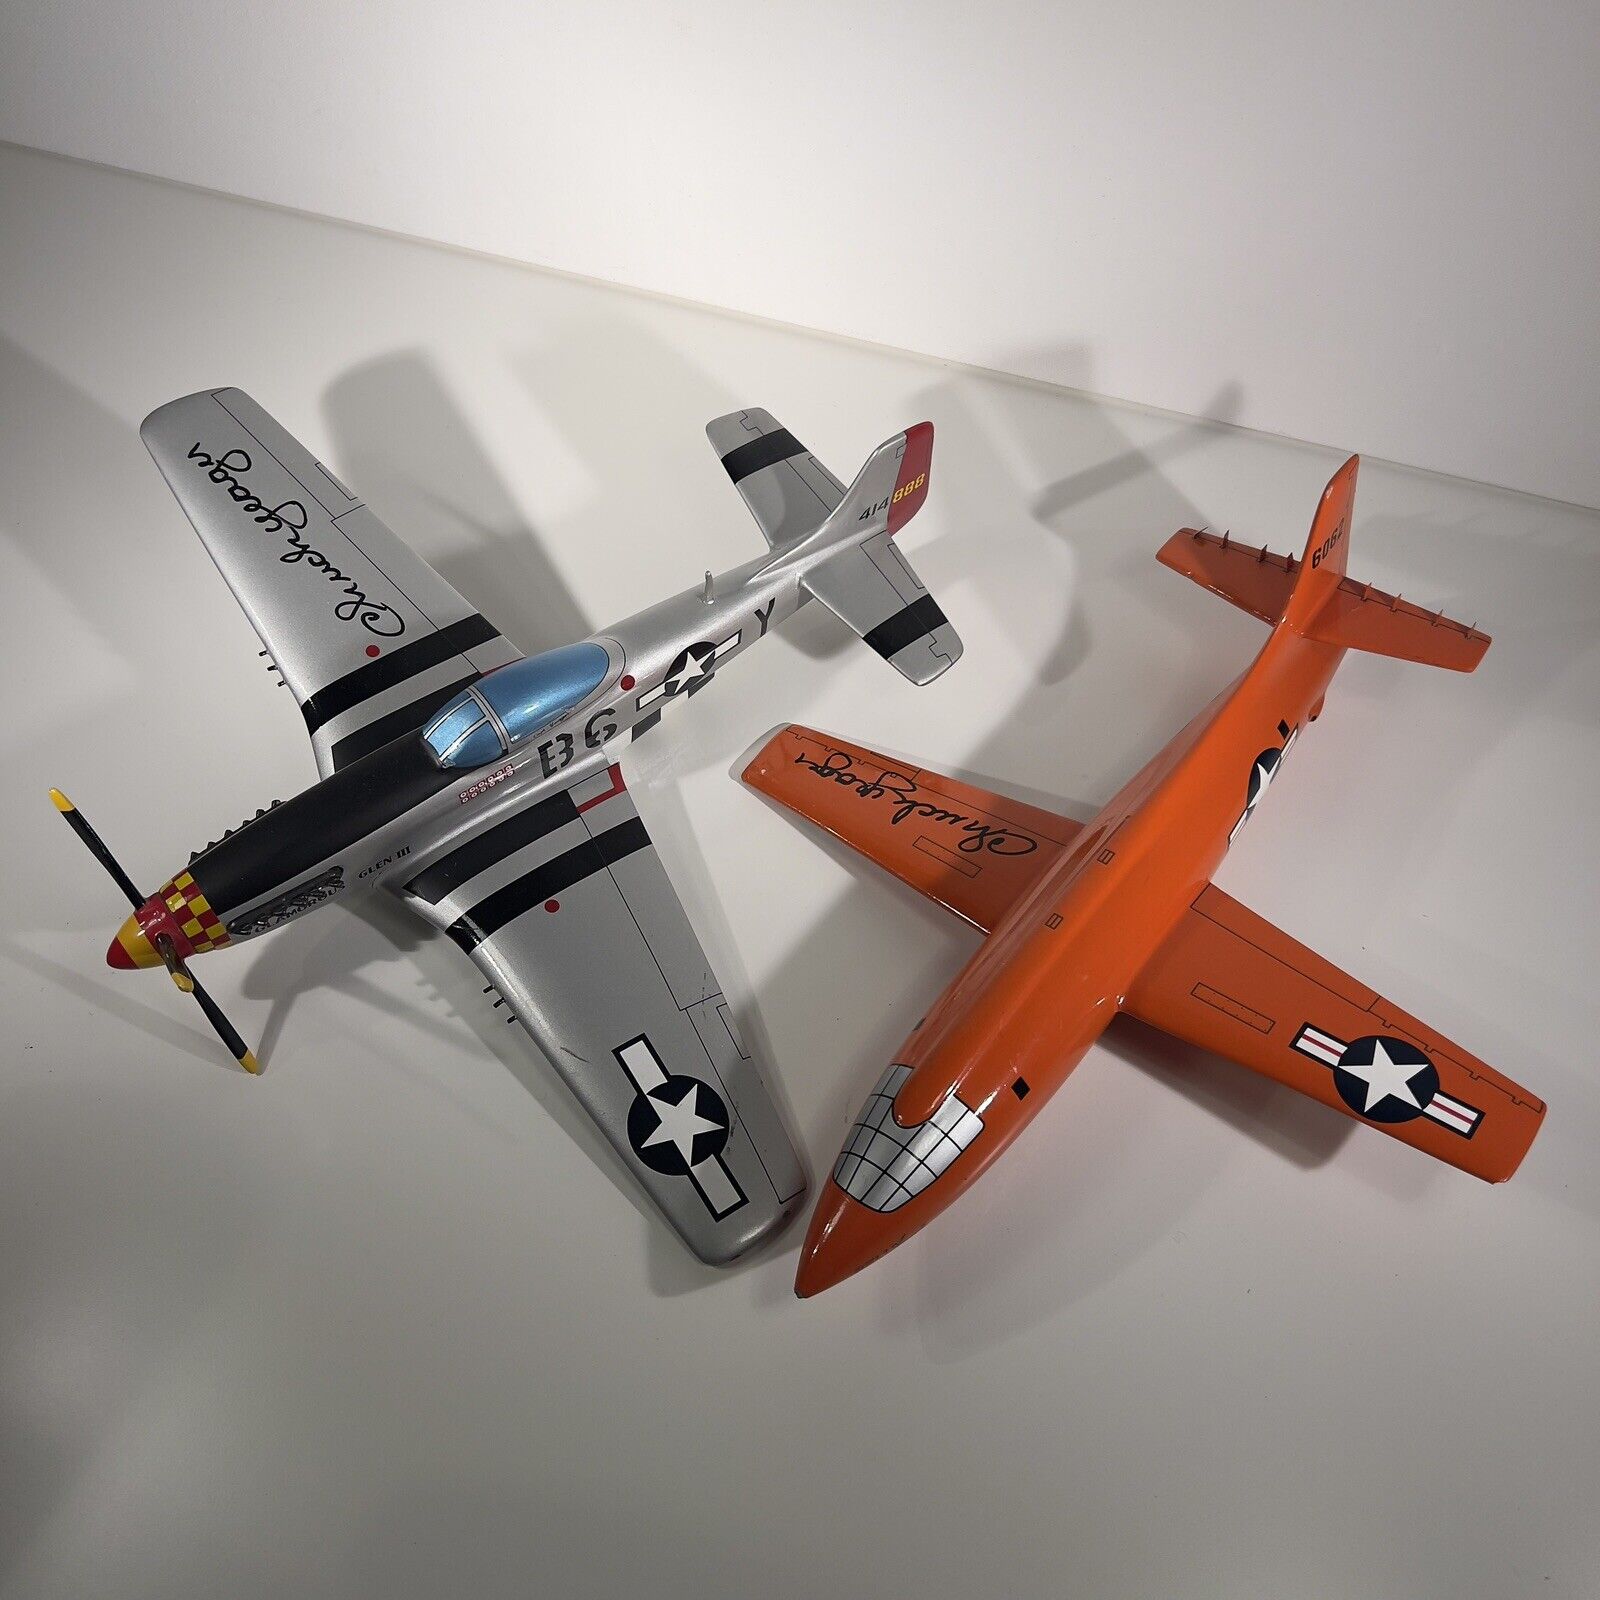 Chuck Yeager Signed P-51 Mustang Fighter and Bell X-1 Model Airplanes